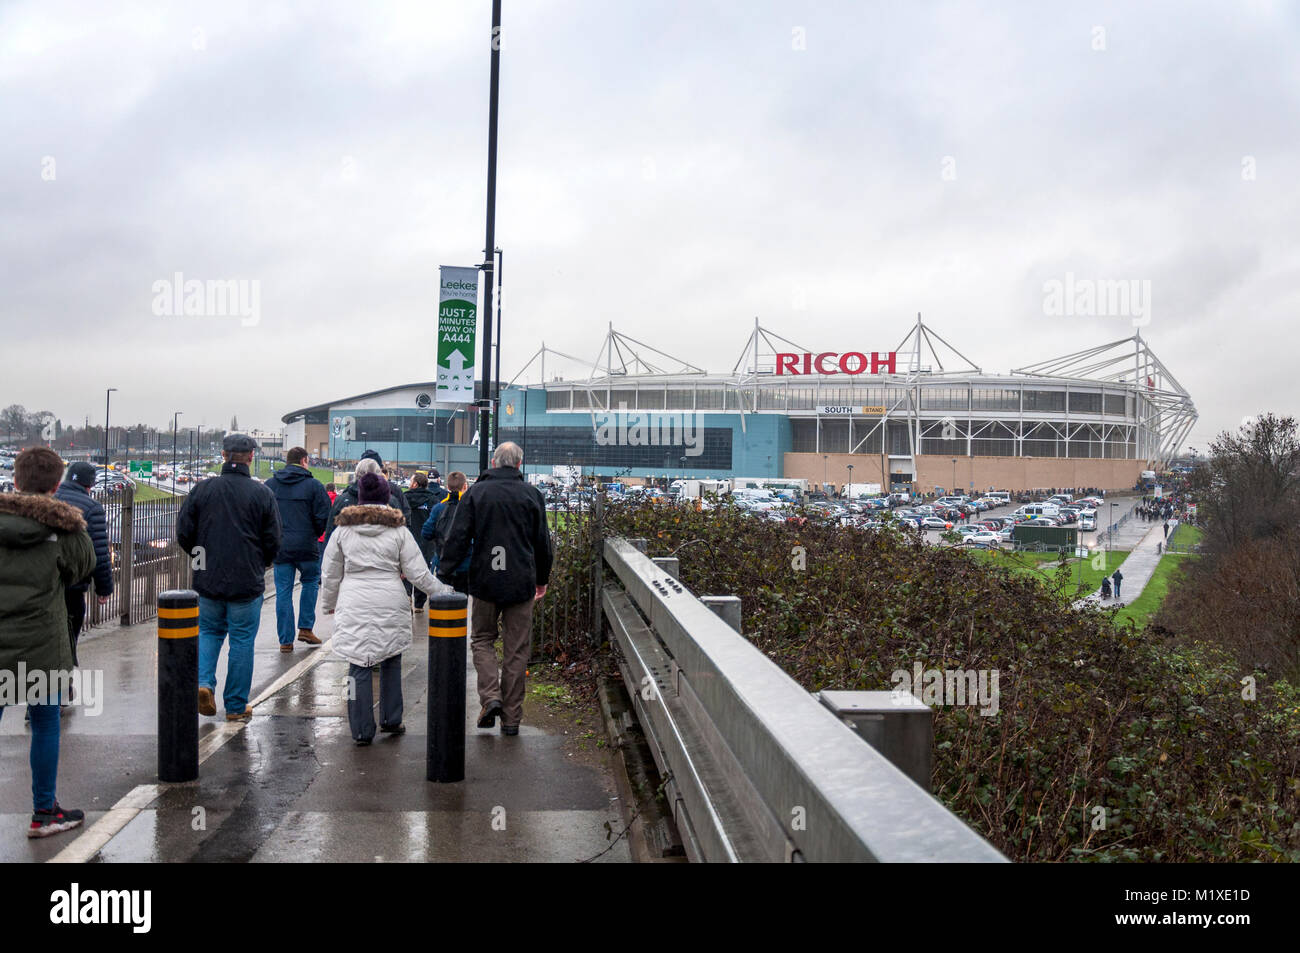 Rugby union supporters walk towards Ricoh Stadium, Coventry, UK home of Wasps professional rugby team Stock Photo